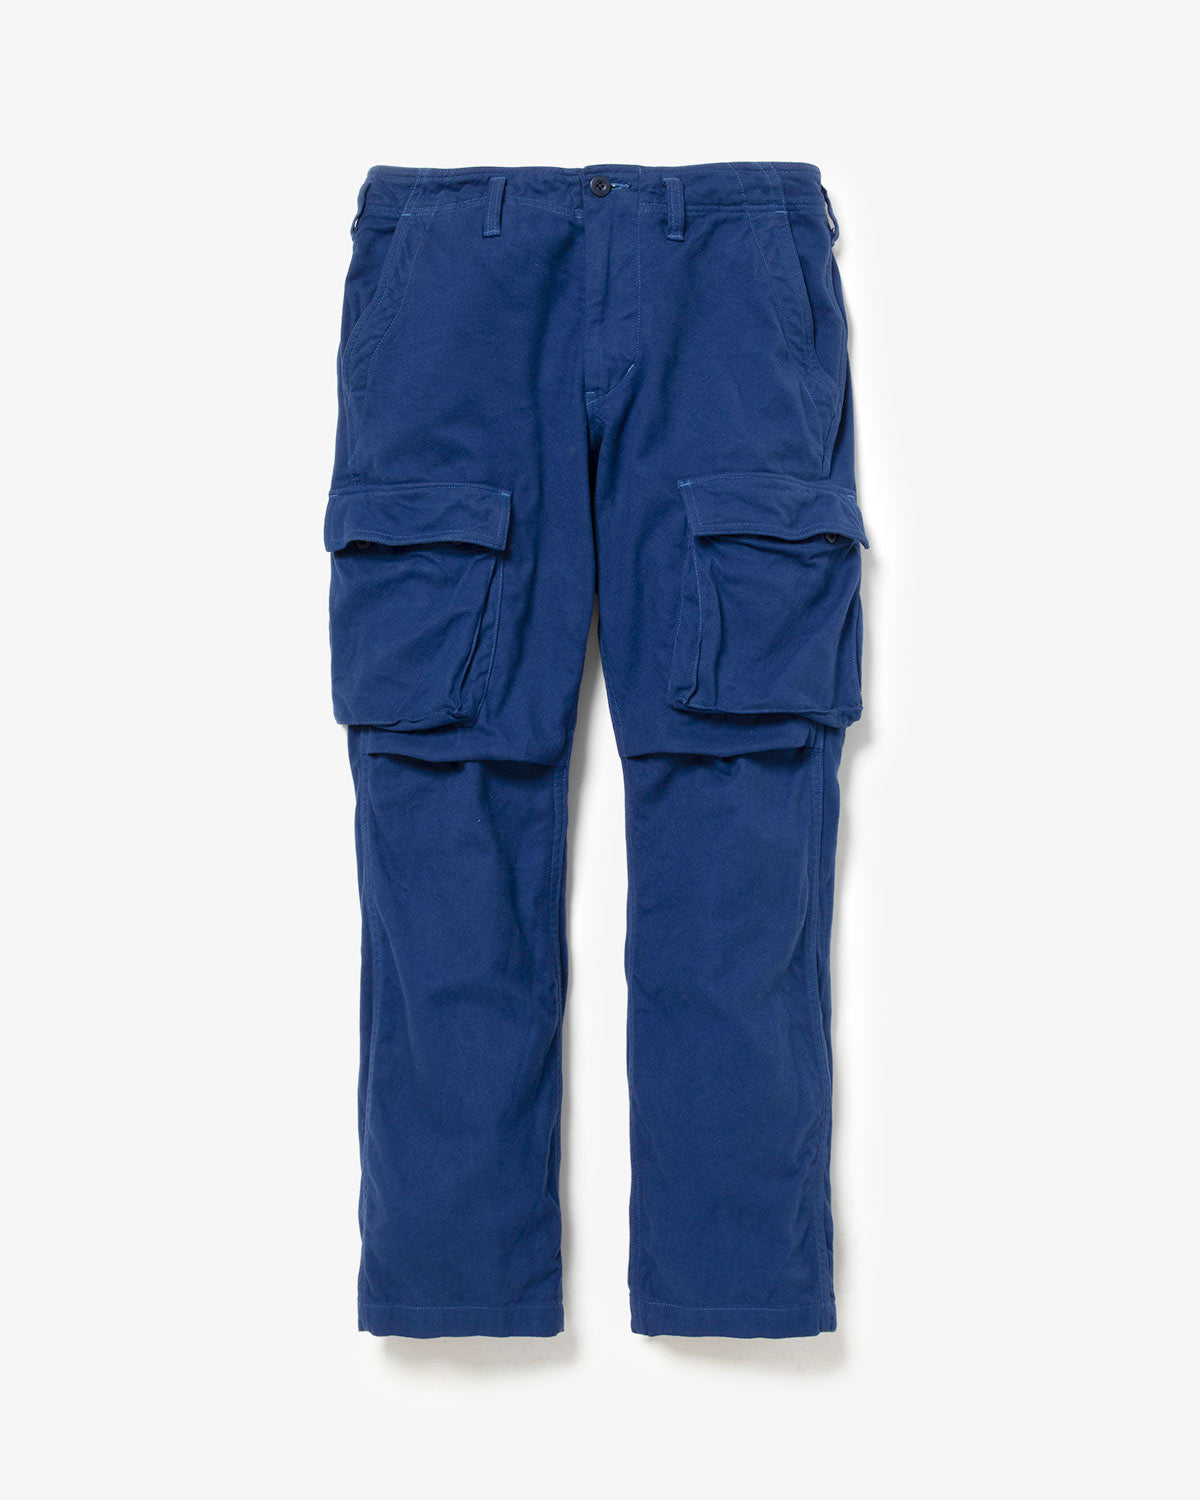 TROOPER 6P TROUSERS COTTON MILITARY FLANNEL OVERDYED